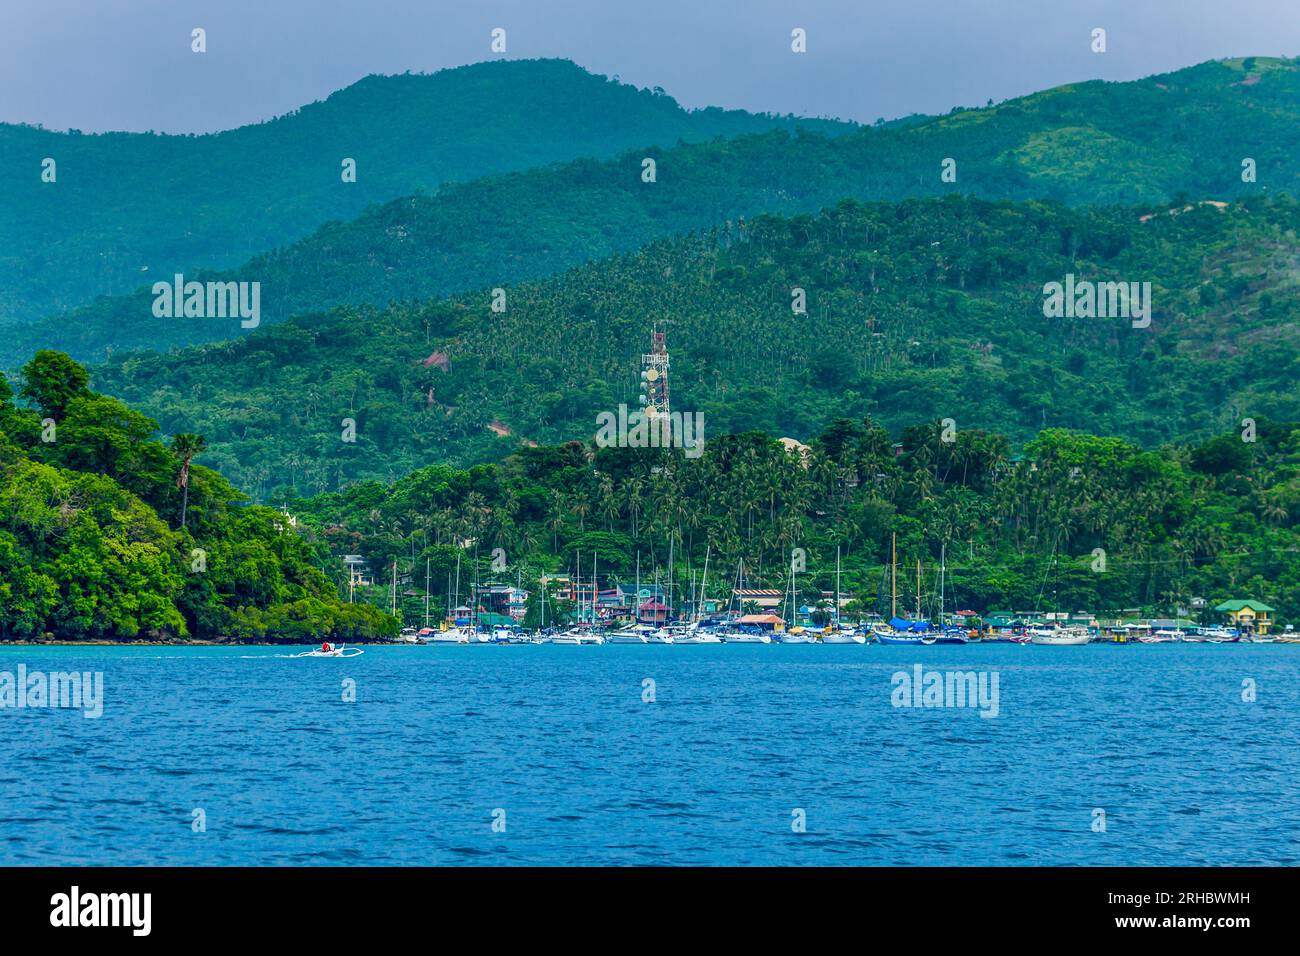 Boats moored in harbour, Batangas, Calabarzon, Luzon, Philippines Stock Photo